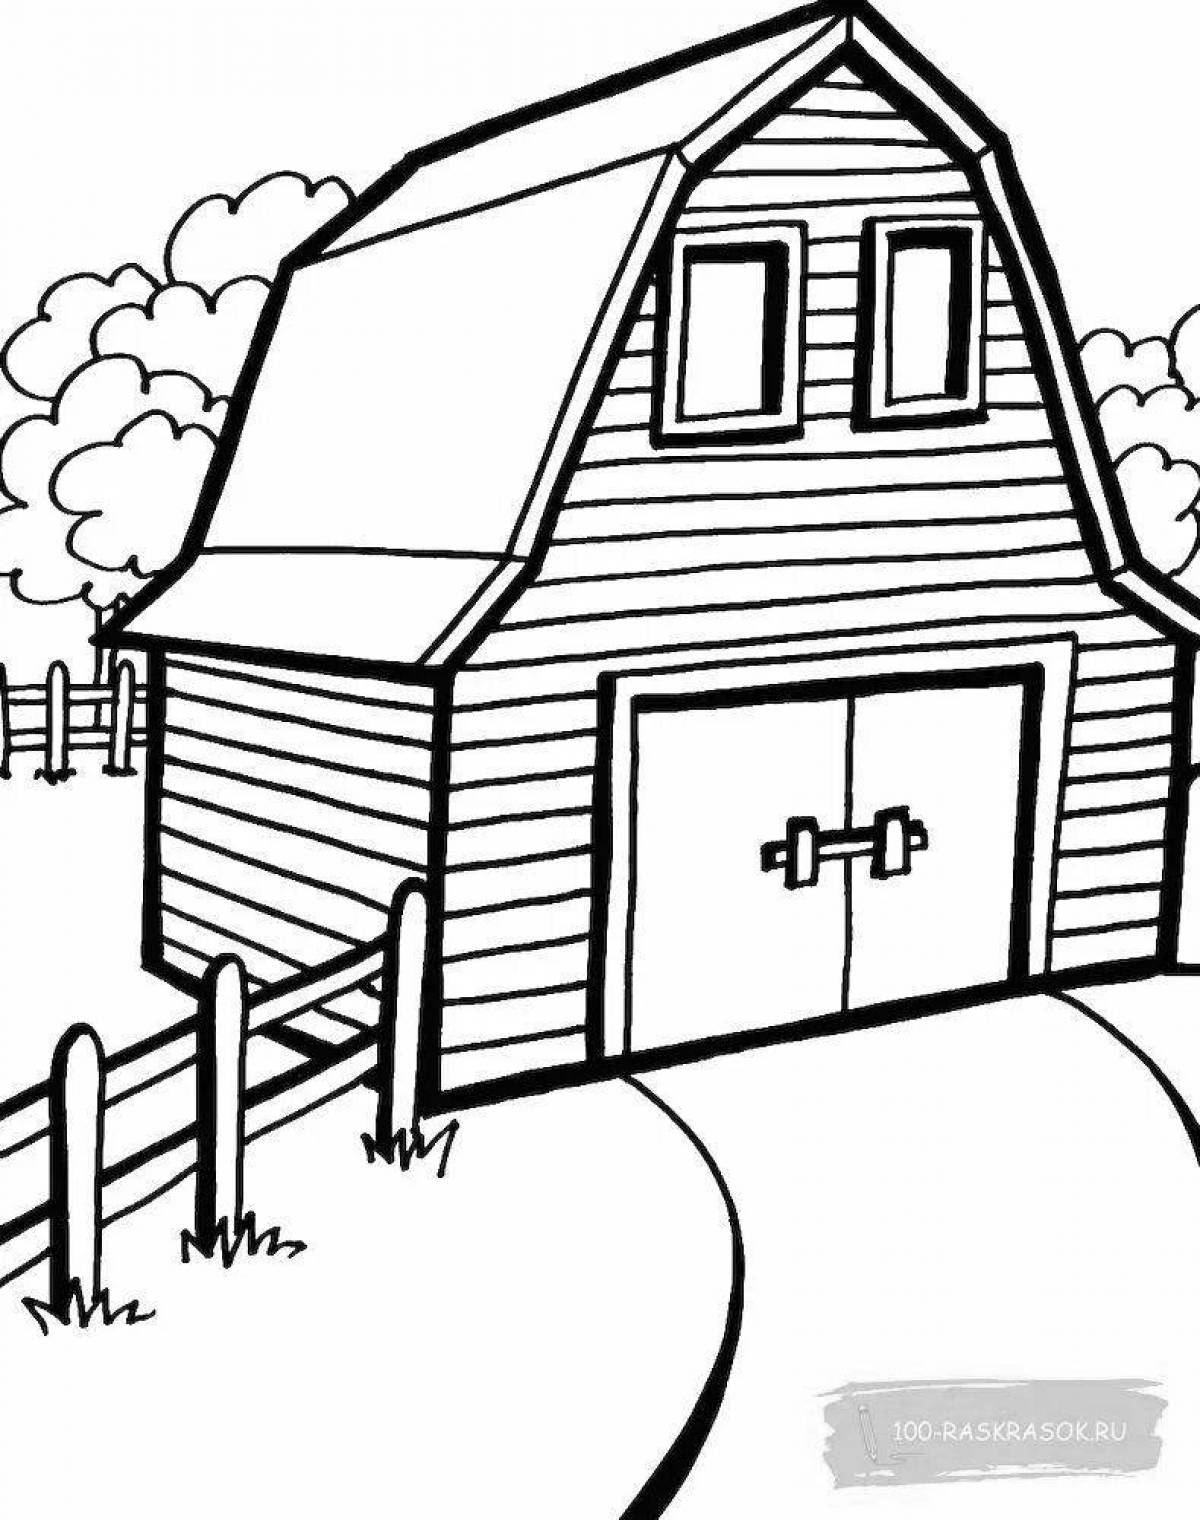 Coloring page delightful country house